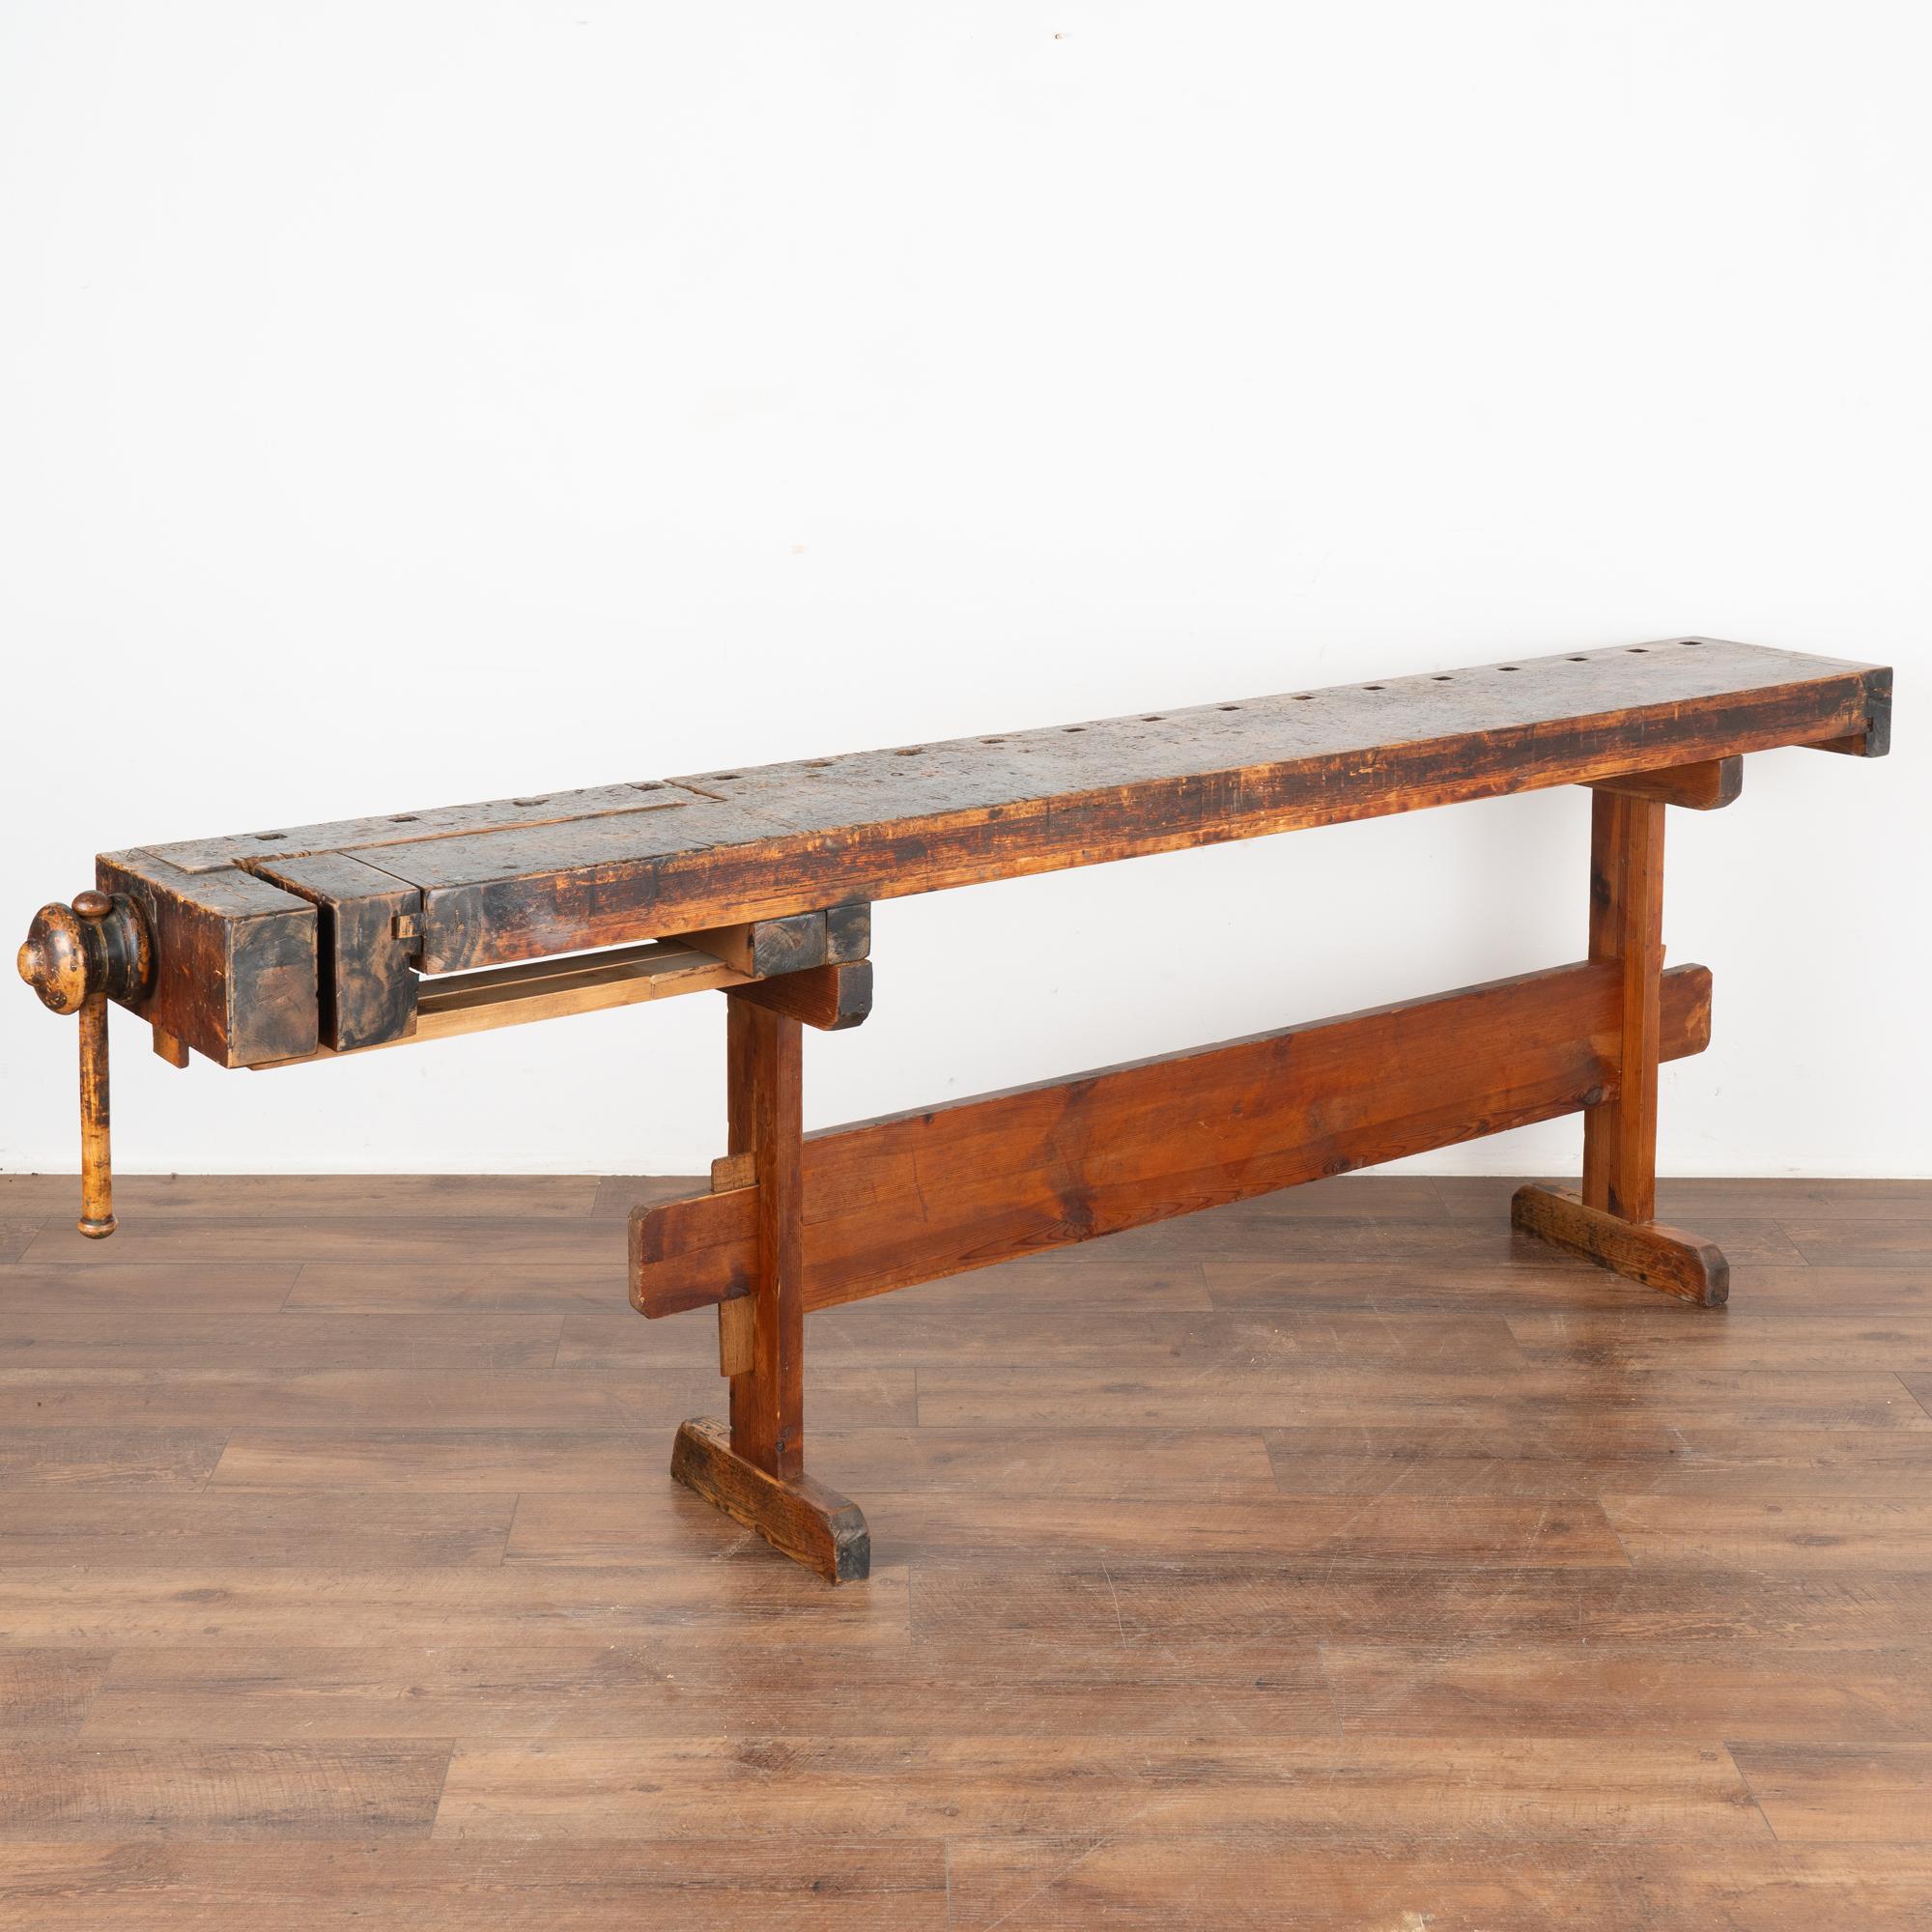 The dark patina of this old carpenter's workbench is a reflection of its age and years of use. Every ding, scratch, deep gouge, paint spill and stain enrich its character and appeal of this rustic console, just over 8' long.
This work table is